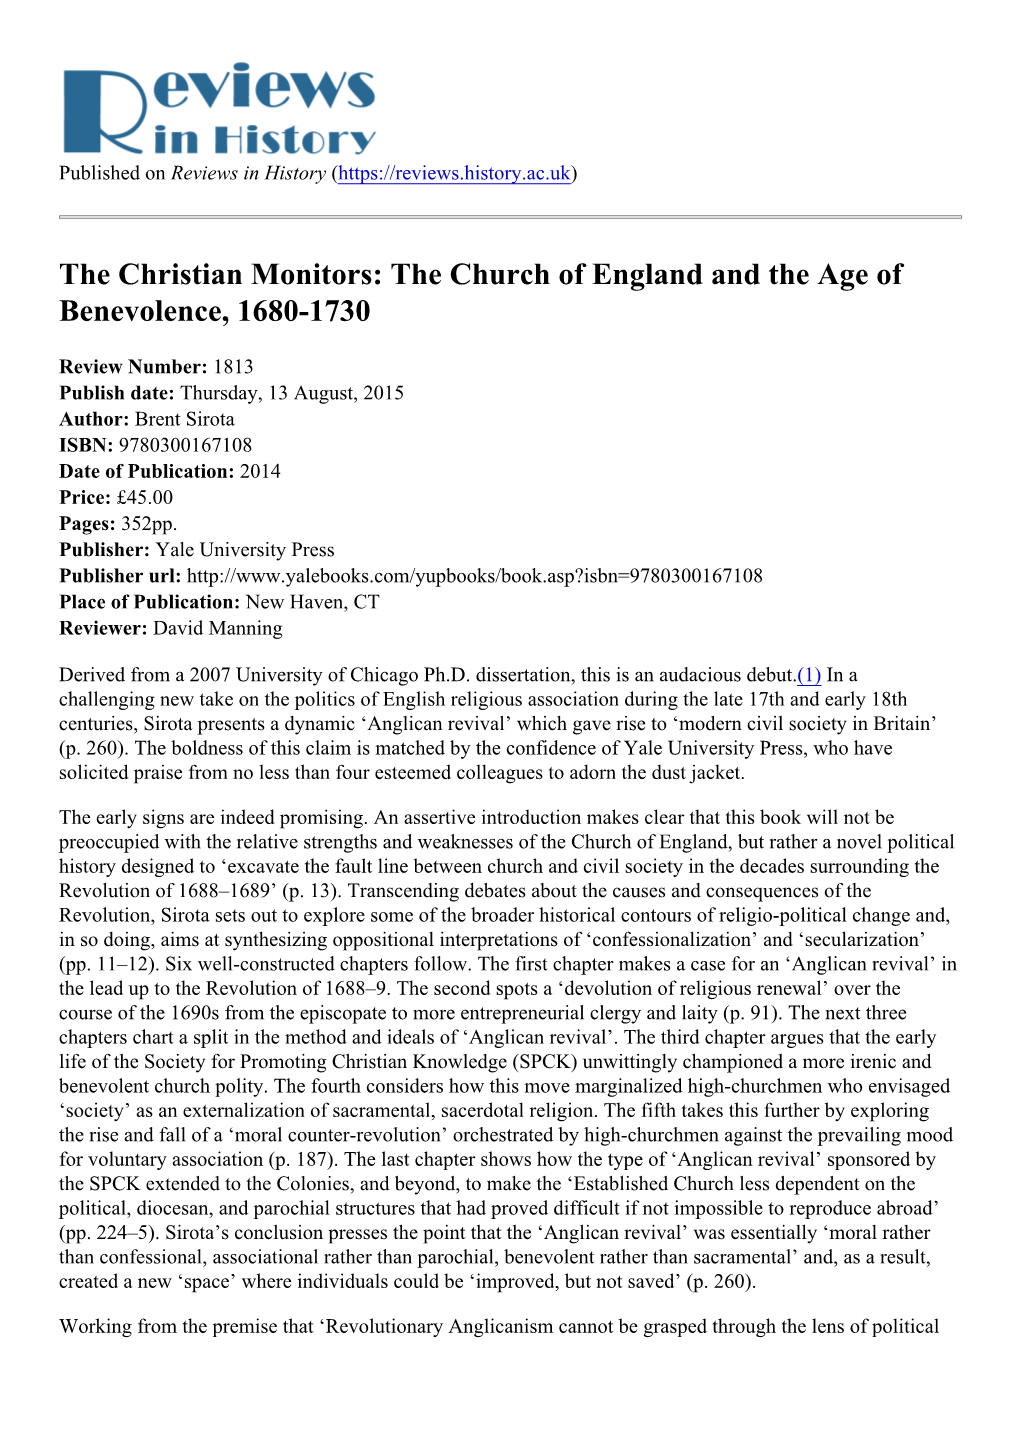 The Christian Monitors: the Church of England and the Age of Benevolence, 1680-1730